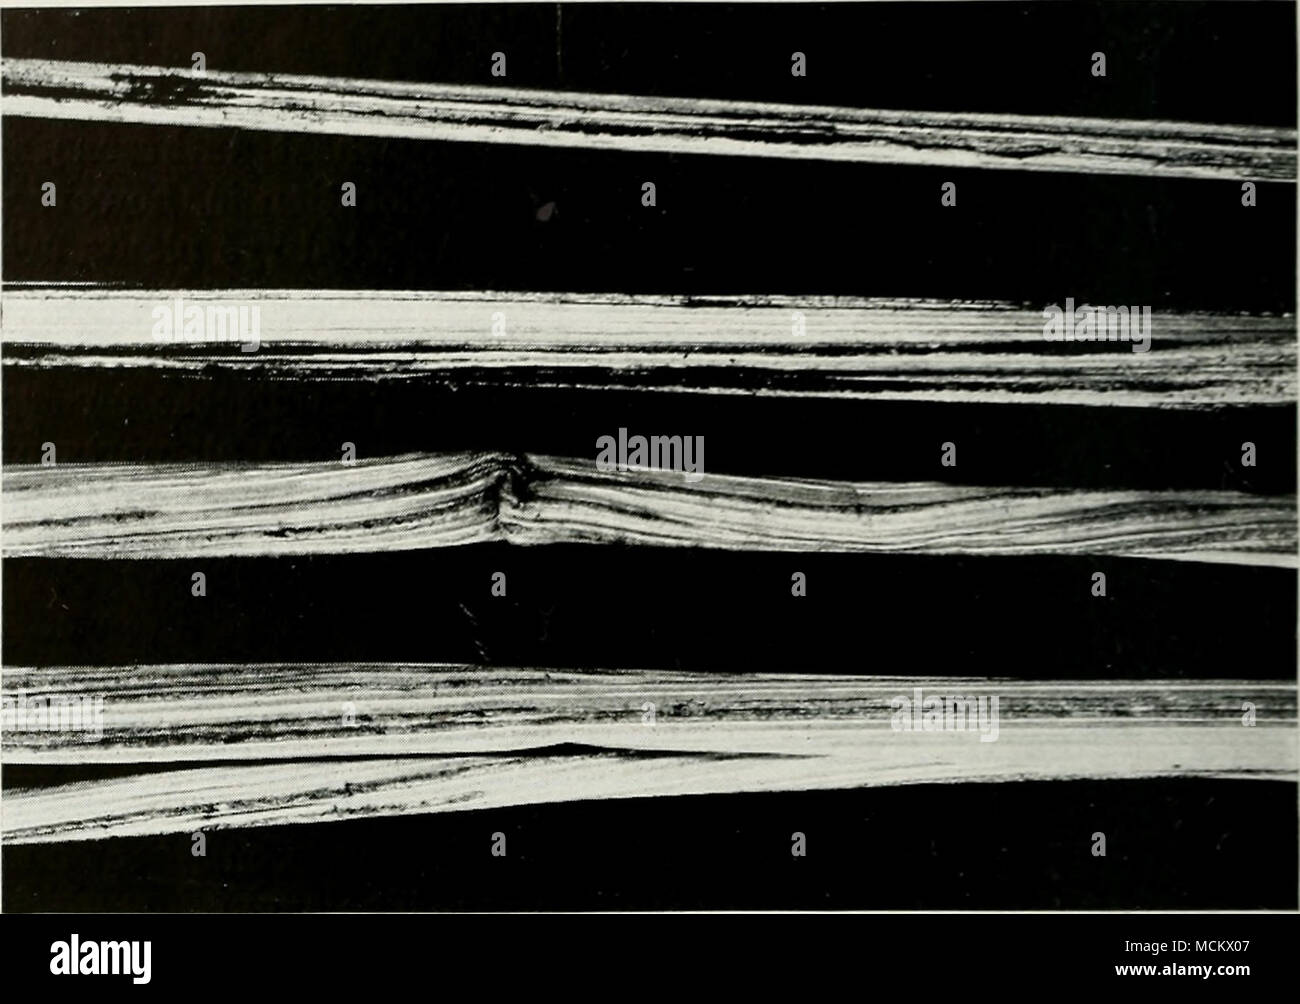 . Fig. 41.—Stem smut of rye. Infection of the rye plant results in the produc- tion of lead-colored stripes running lengthwise of the leaves and stems. The stripes break open eventually, setting free the masses of black, powdery smut spores with which they are filled. Life History.—The disease carries over from year to year in the form of spores which adhere to the seed or infest the soil. Germination of these spores and infection of rye seedlings is similar to that described for flag smut of wheat on page 42. Subsequent growth of the fungus takes place in the growing plant, and the new crop o Stock Photo